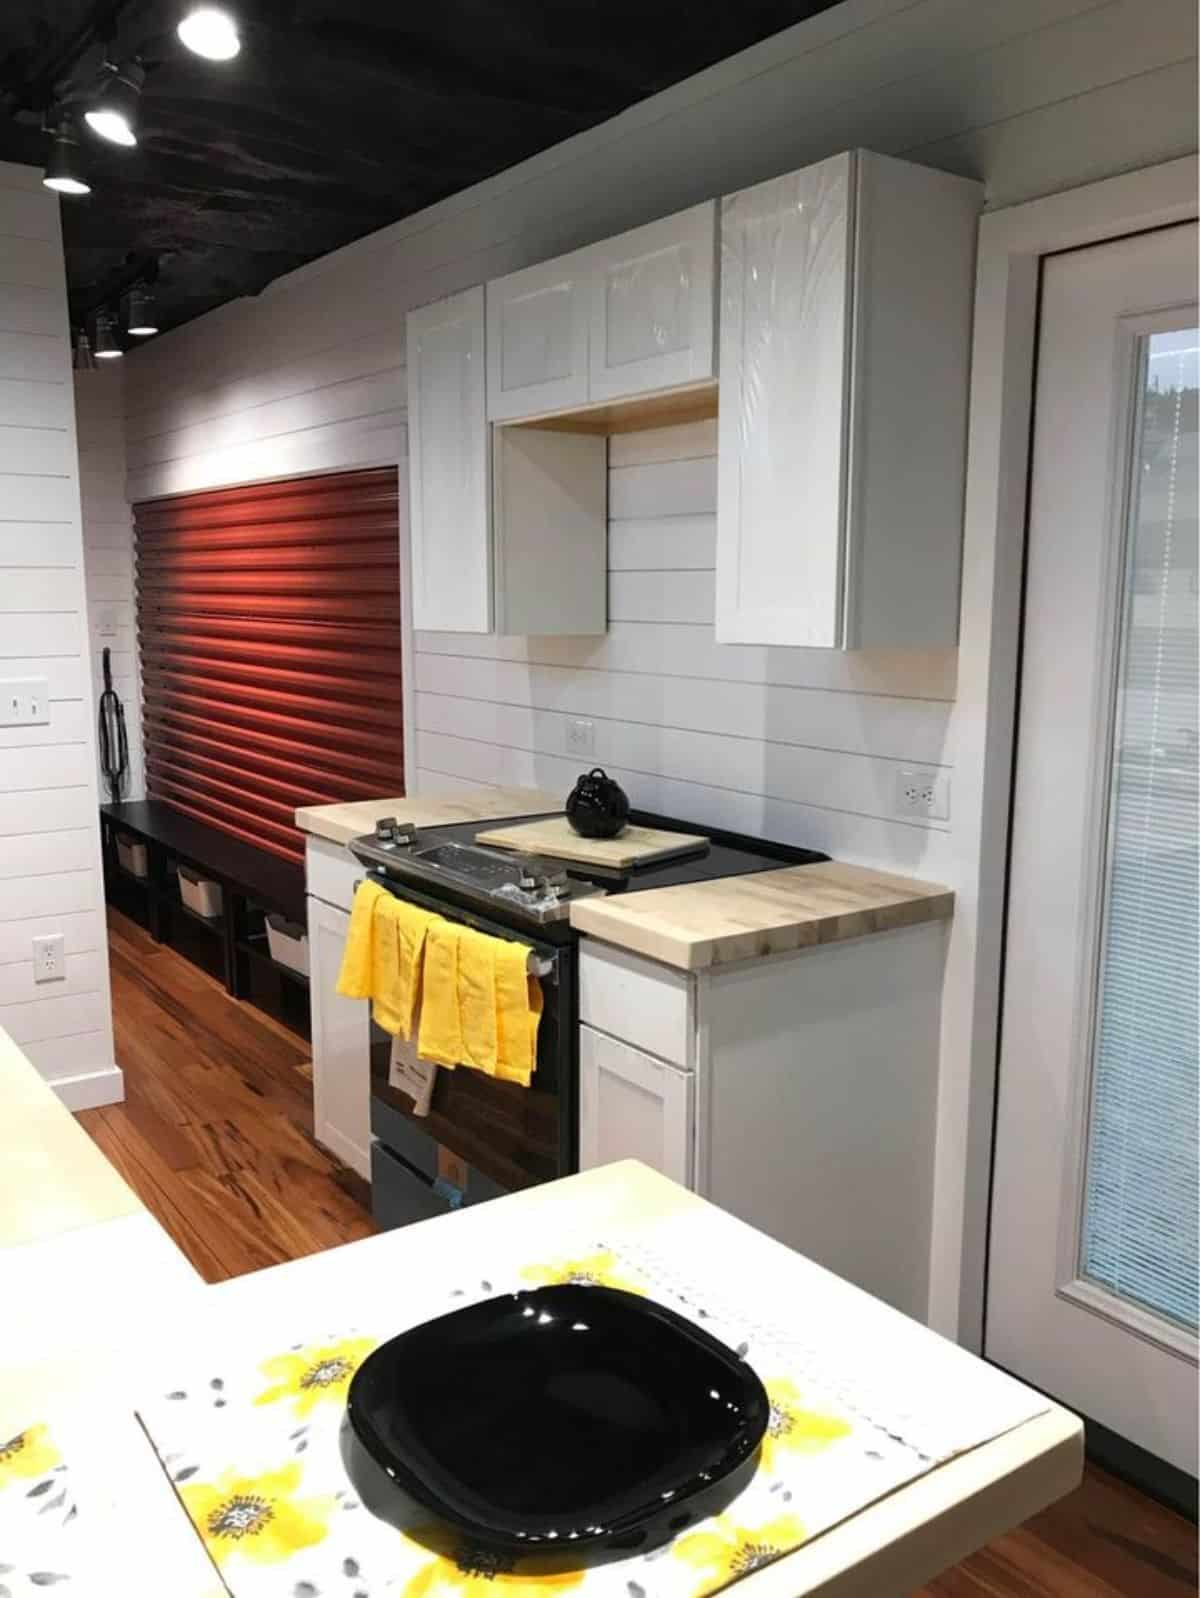 Opposite is cabinets and stove cum oven